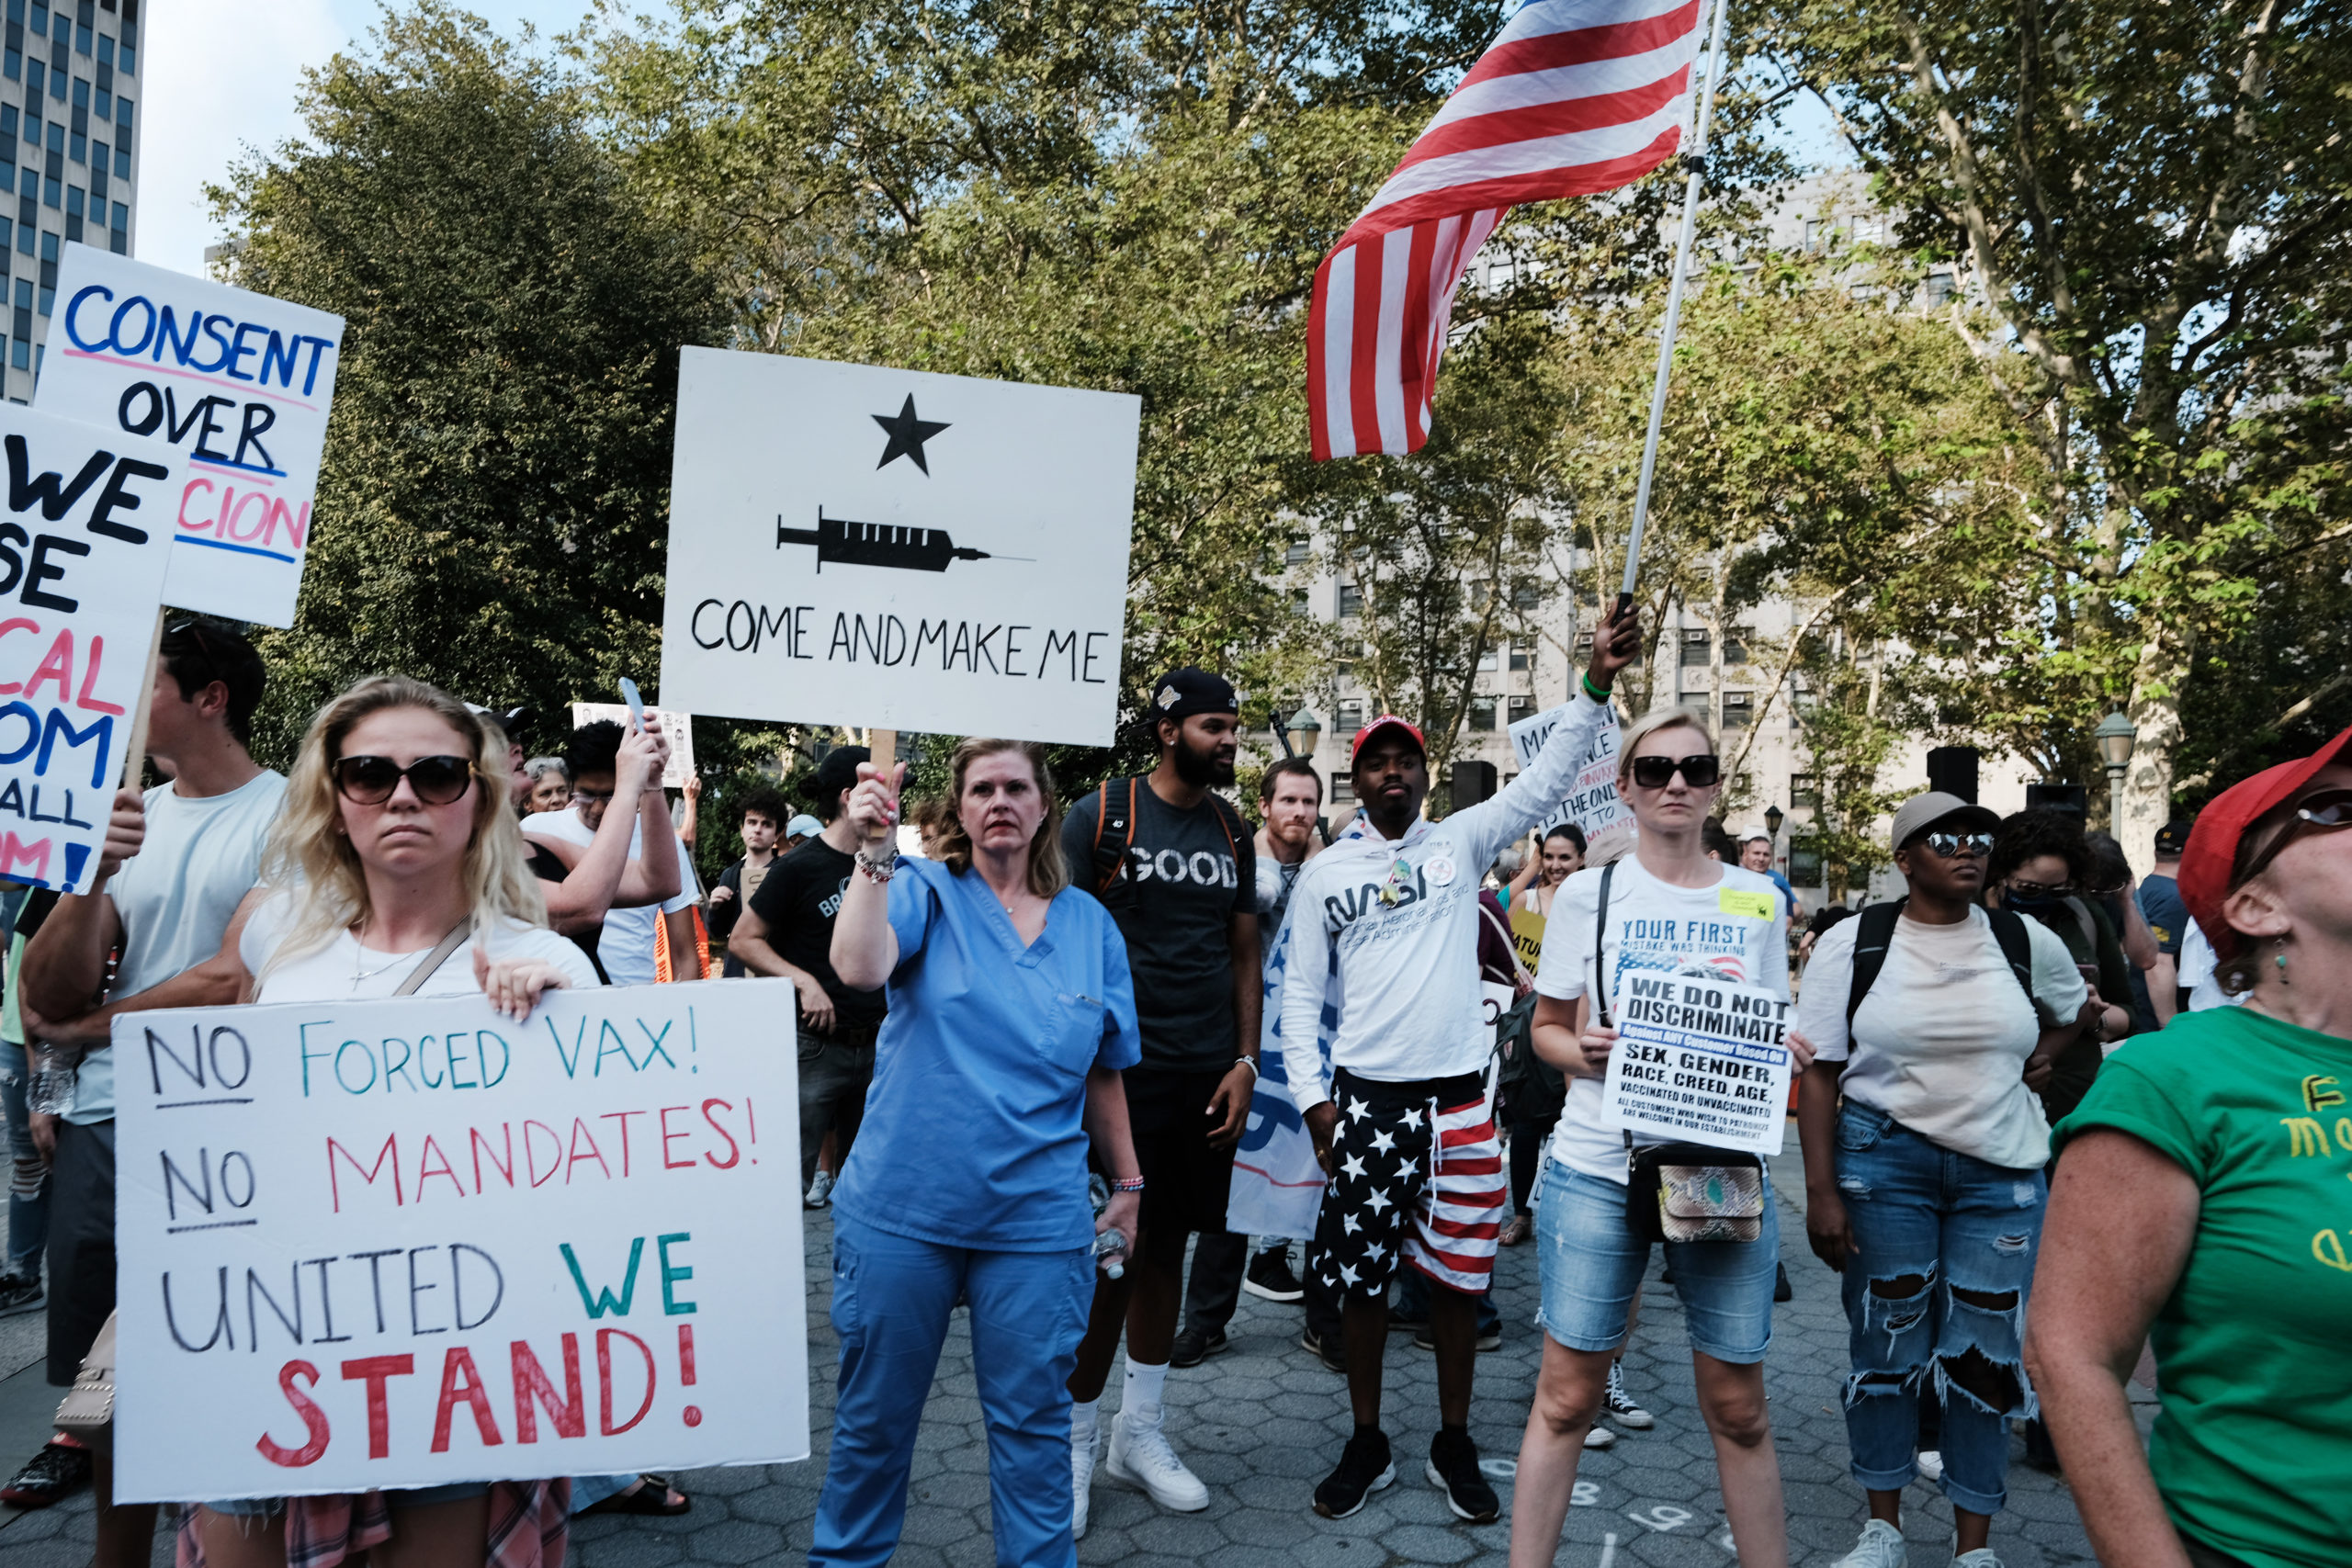 People participate in a rally and march against COVID-19 vaccine mandates on Sept. 13 in New York City. (Spencer Platt/Getty Images)